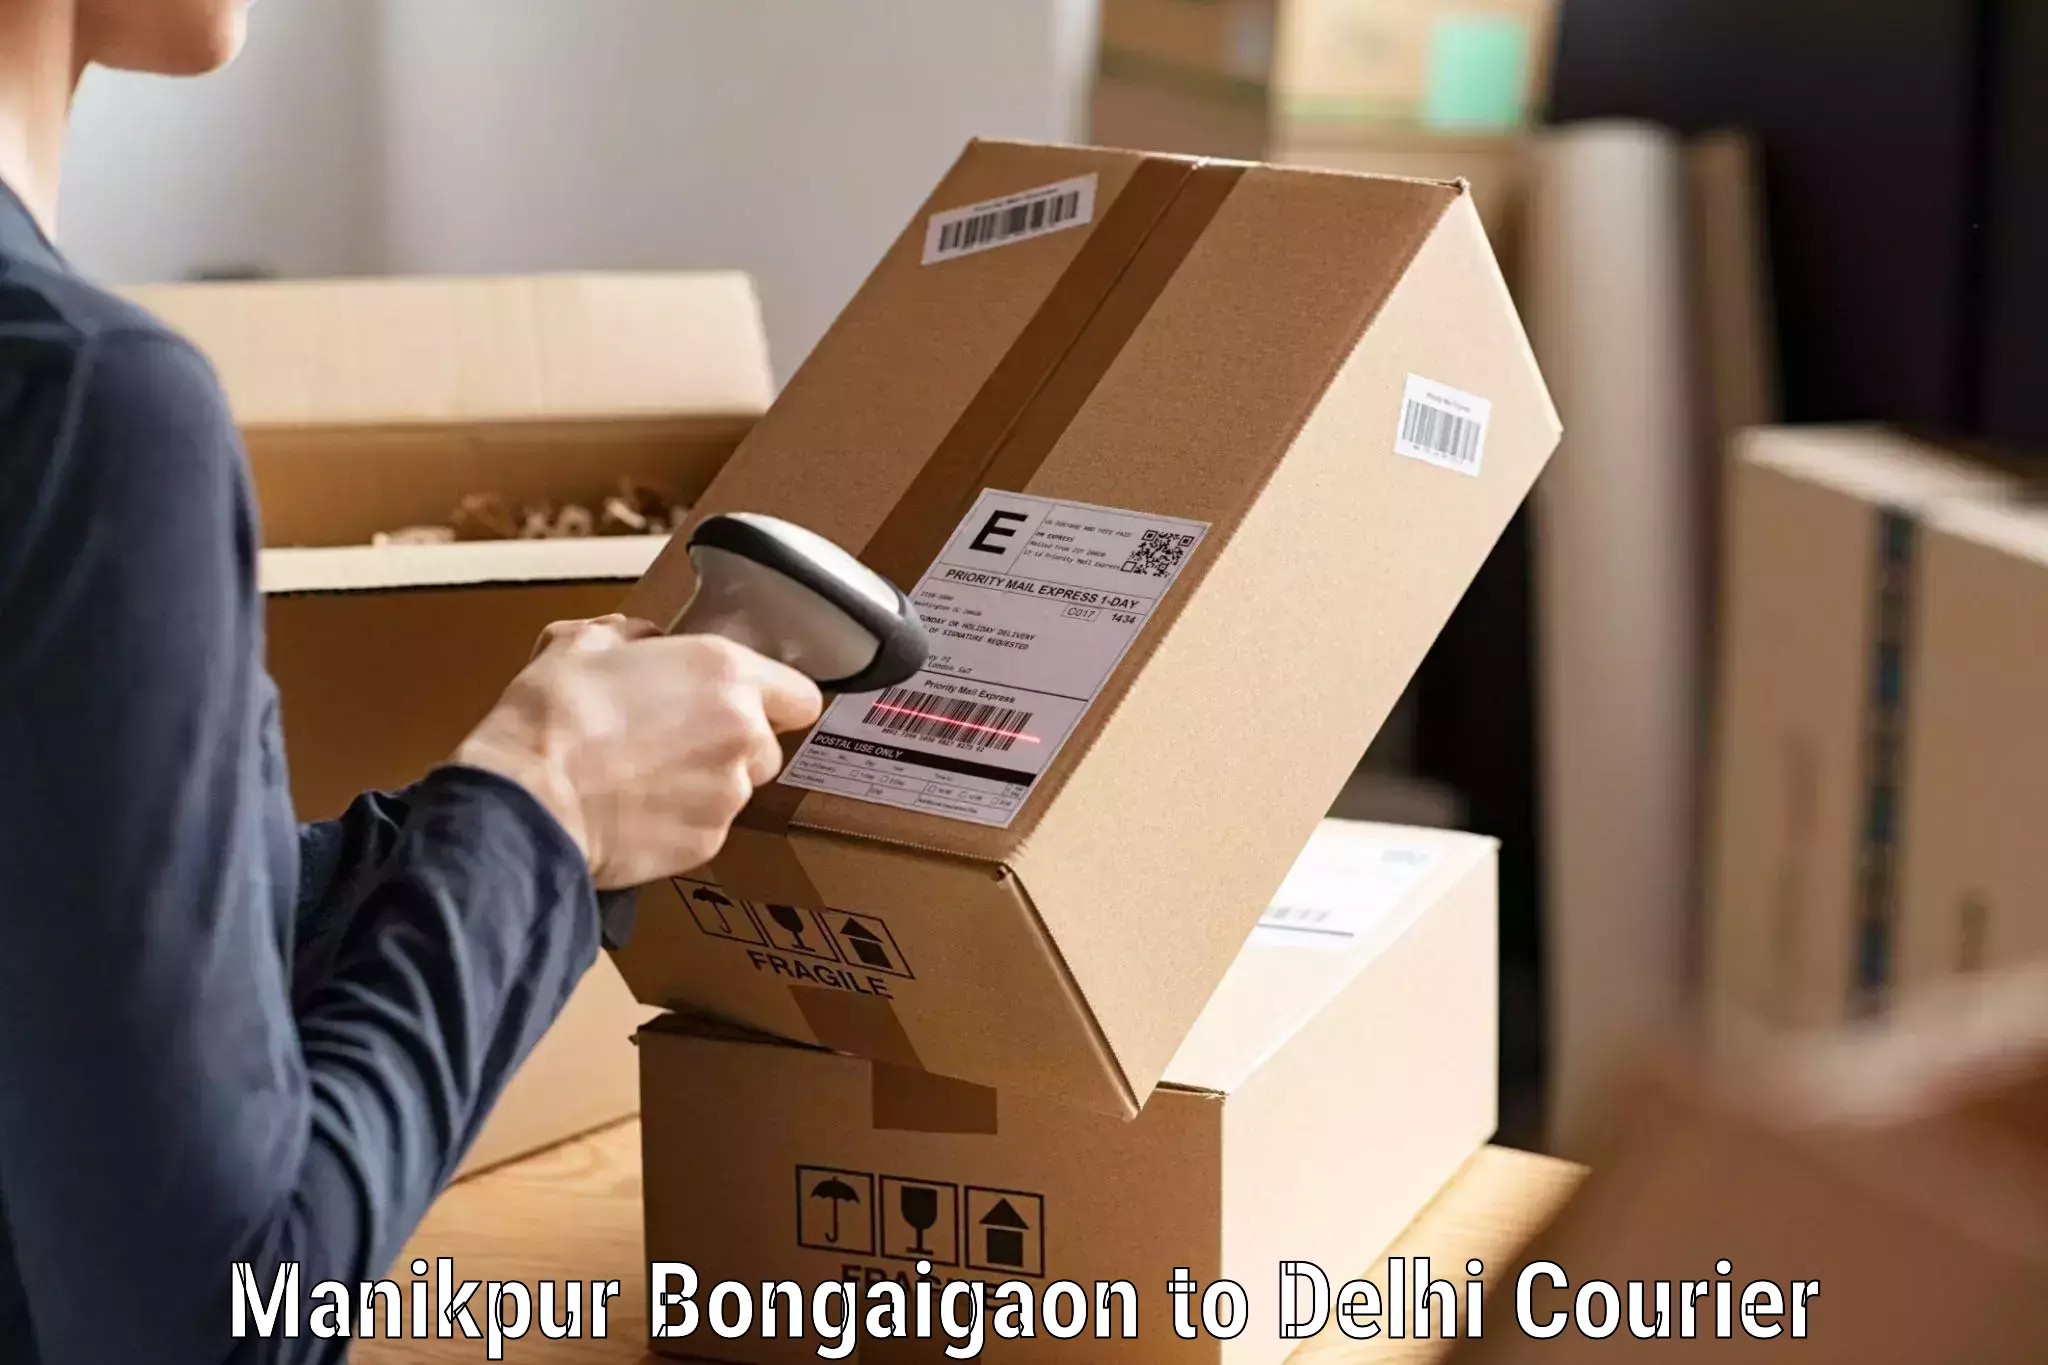 Comprehensive delivery network Manikpur Bongaigaon to University of Delhi